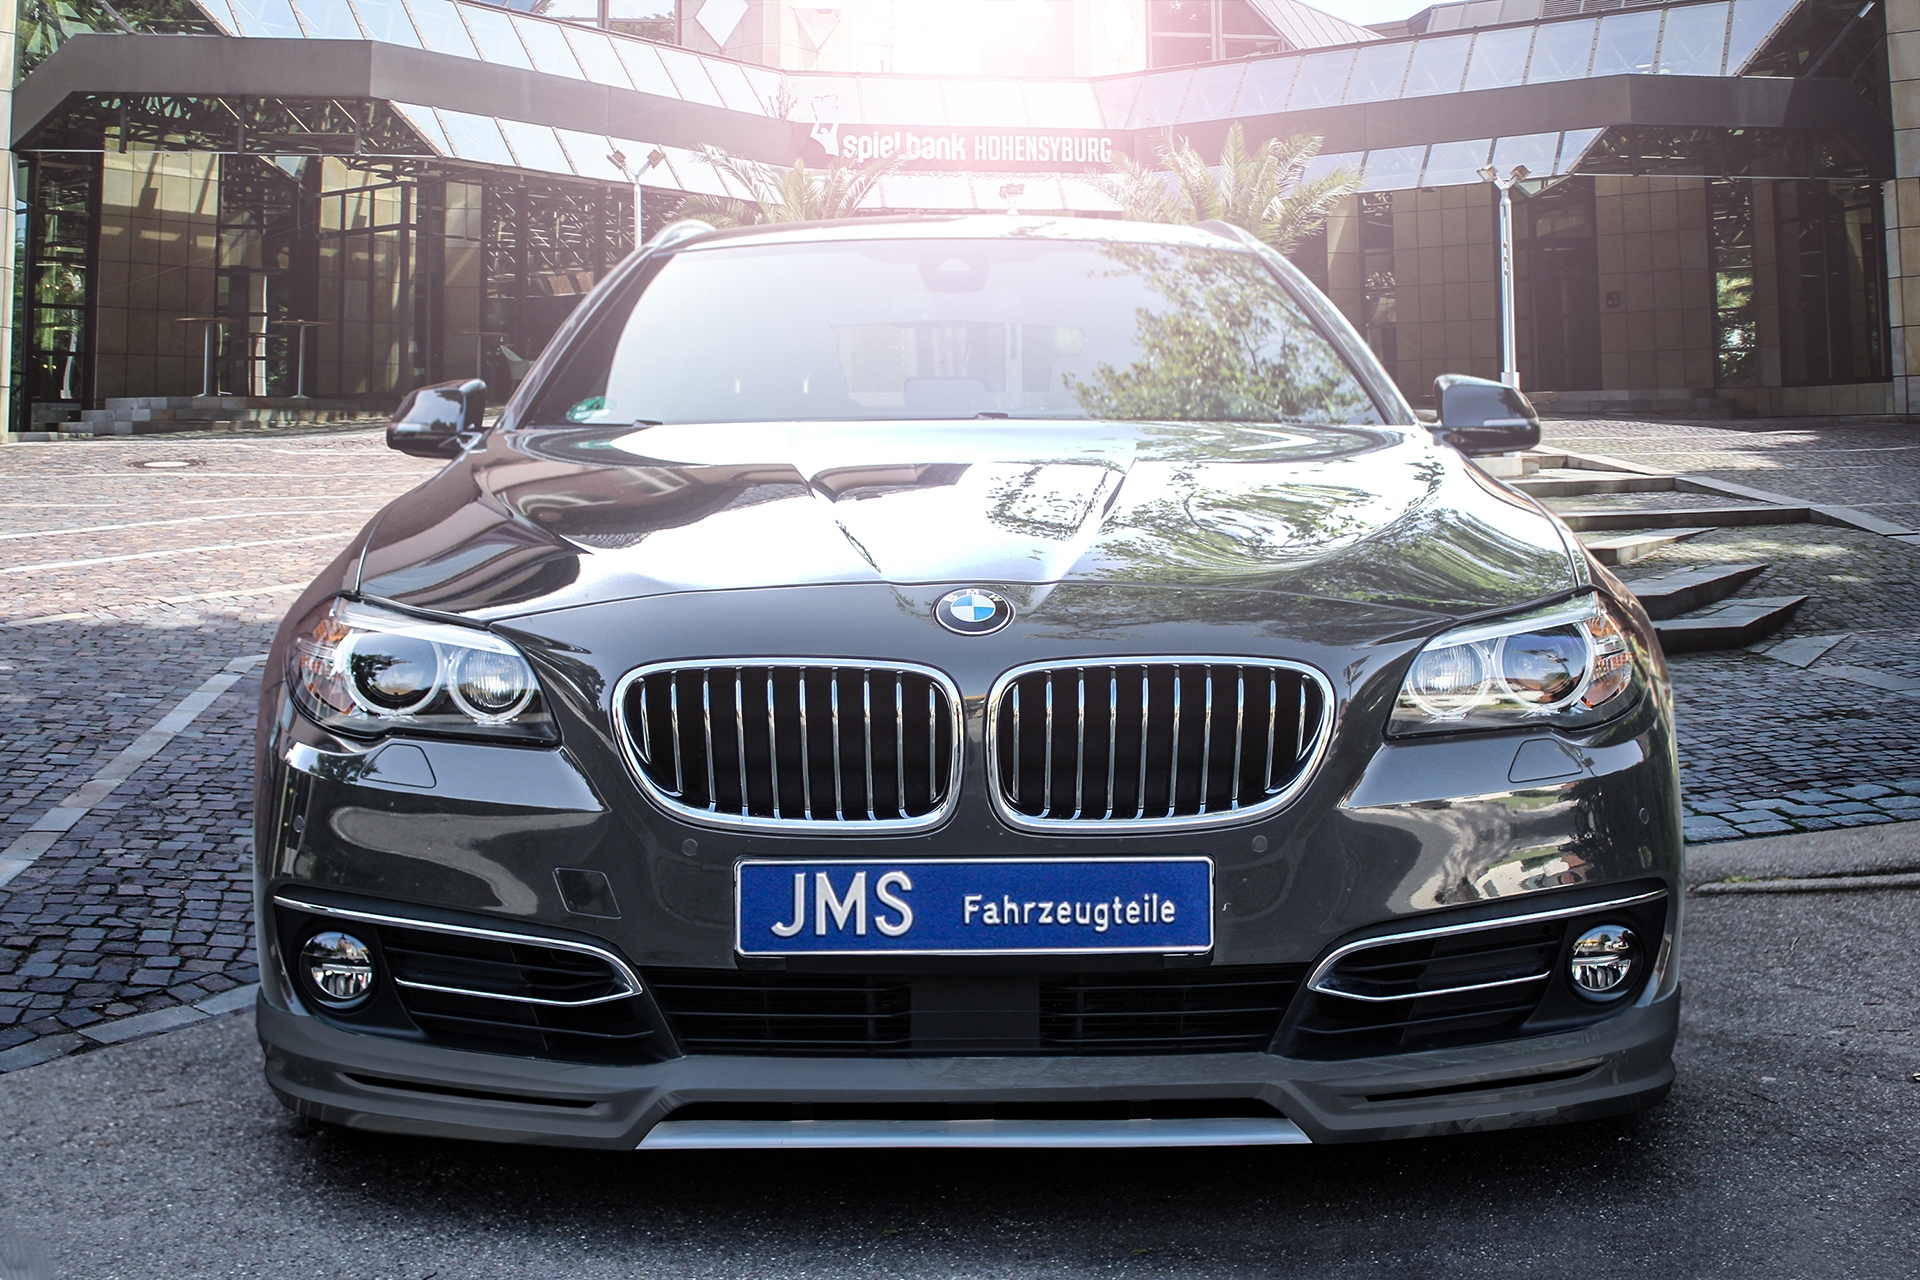 JMS Styling & Tuning for F10/F11 Facelift, JMS - Fahrzeugteile GmbH, Story  - PresseBox